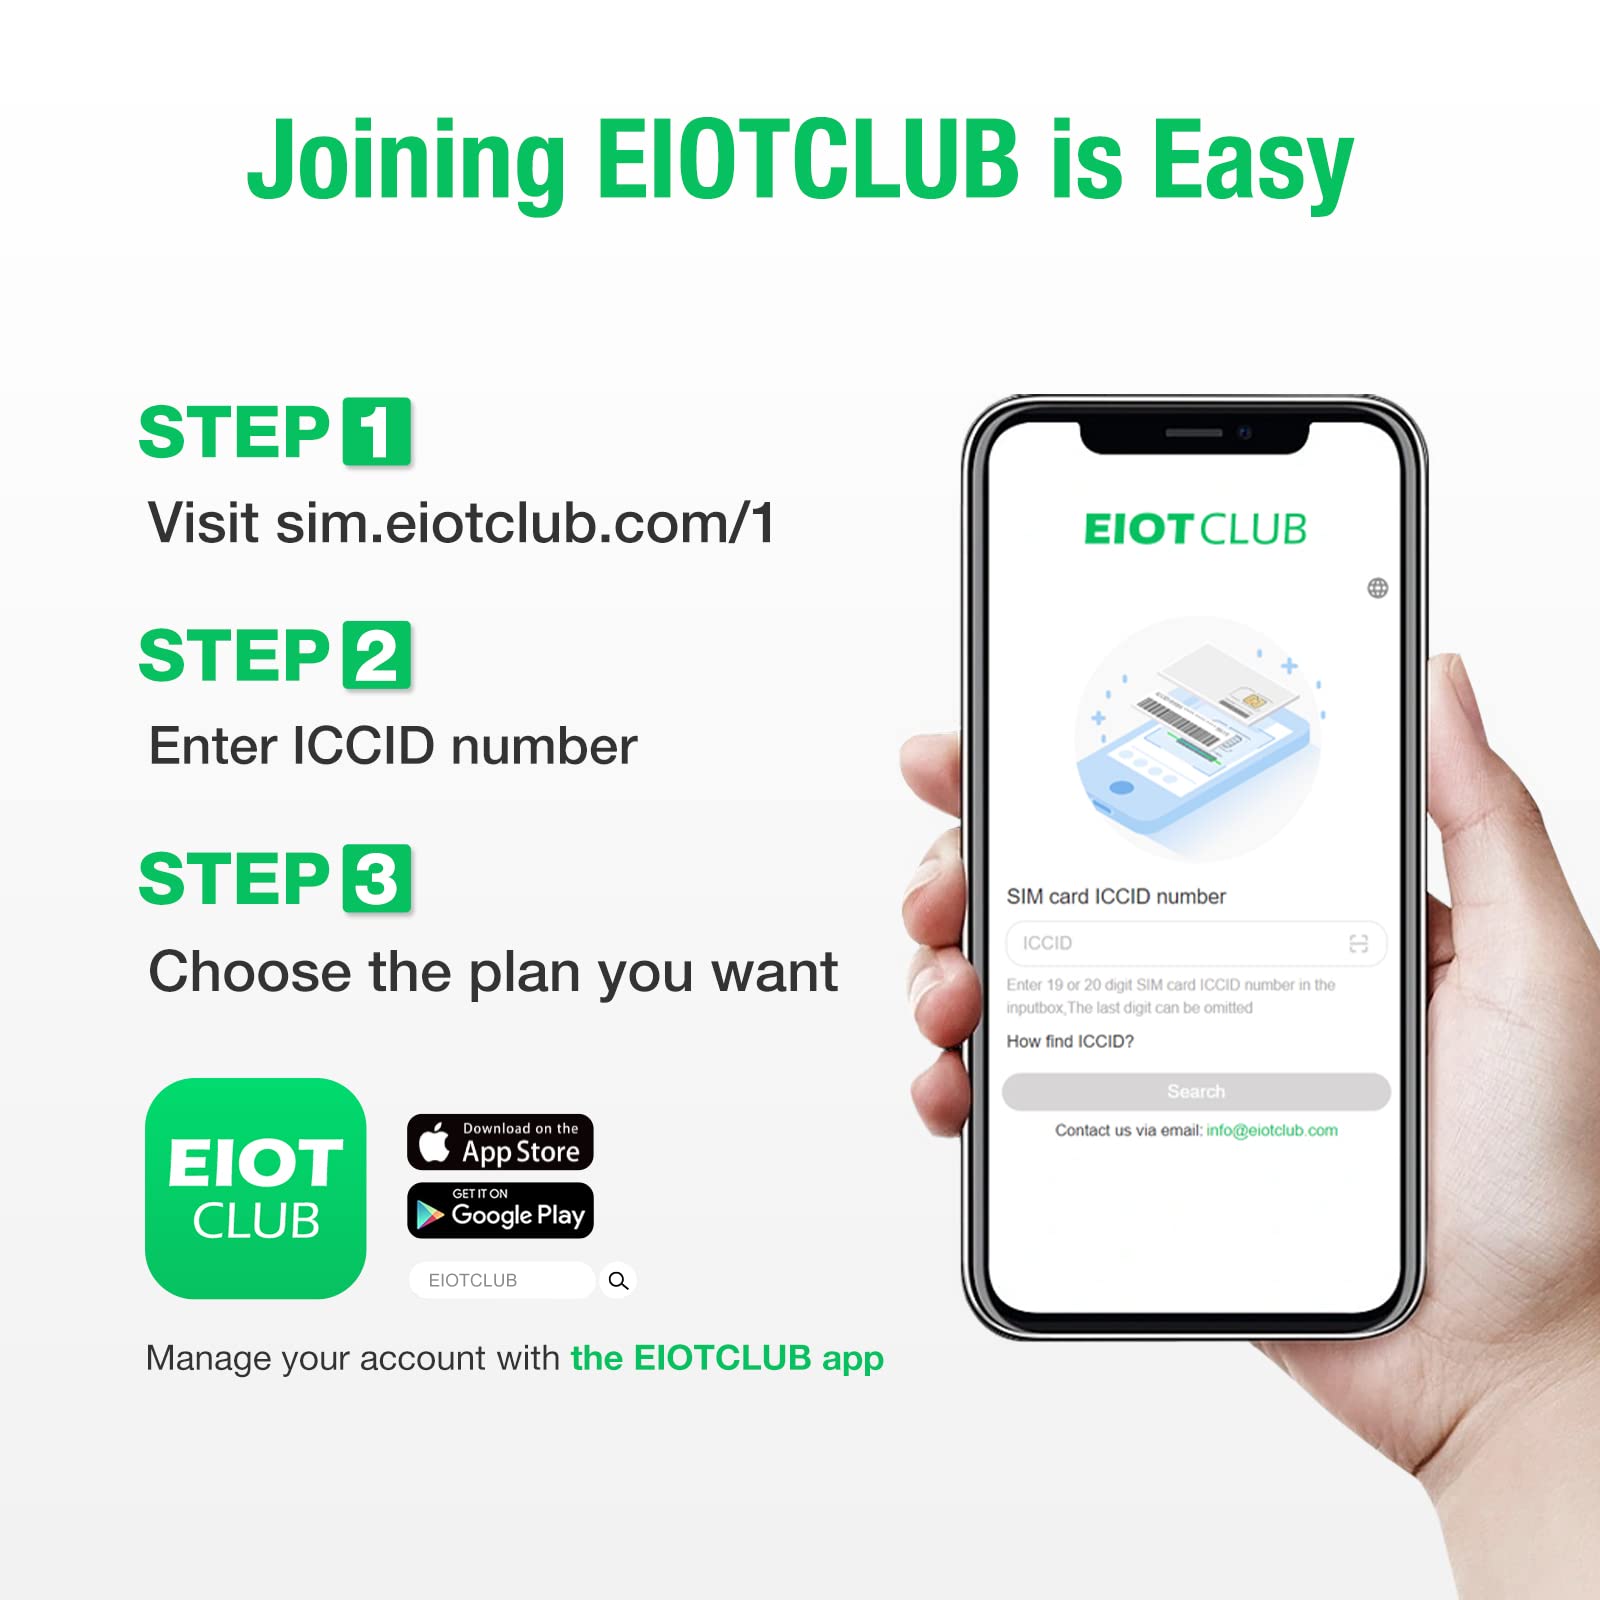 EIOTCLUB Data Only SIM Card 4G LTE Support AT&T, T-Mobile and Verizon Network for Cellular Security Camera Hunting Camera 4G Router Unlocked IoT Device (No Phone Number, Data Only)